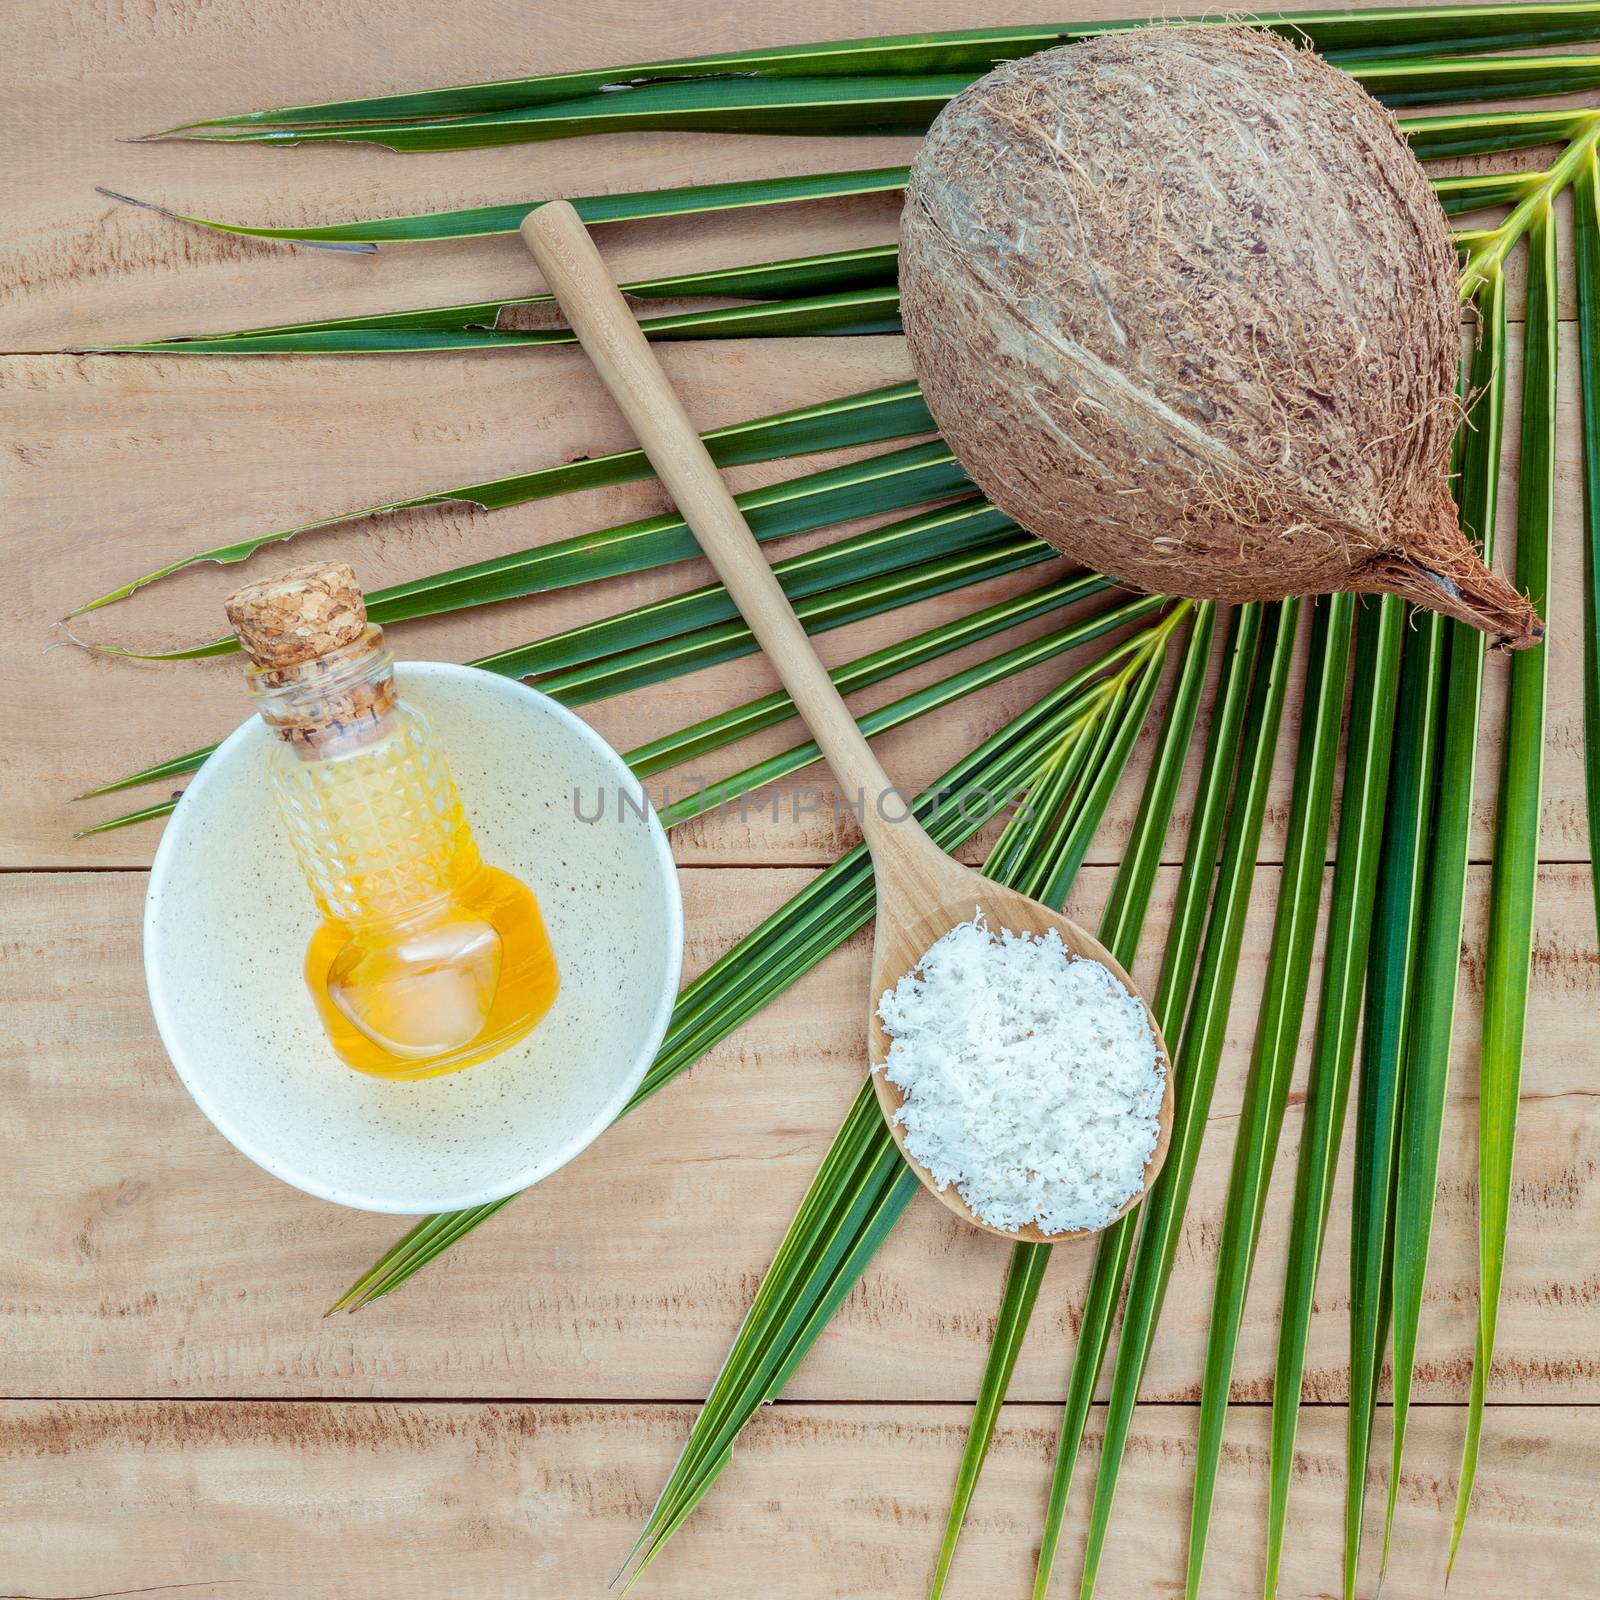 Coconut oil , coconut powder and coconut on coconut leaves set up on brown wooden background for alternative therapy.